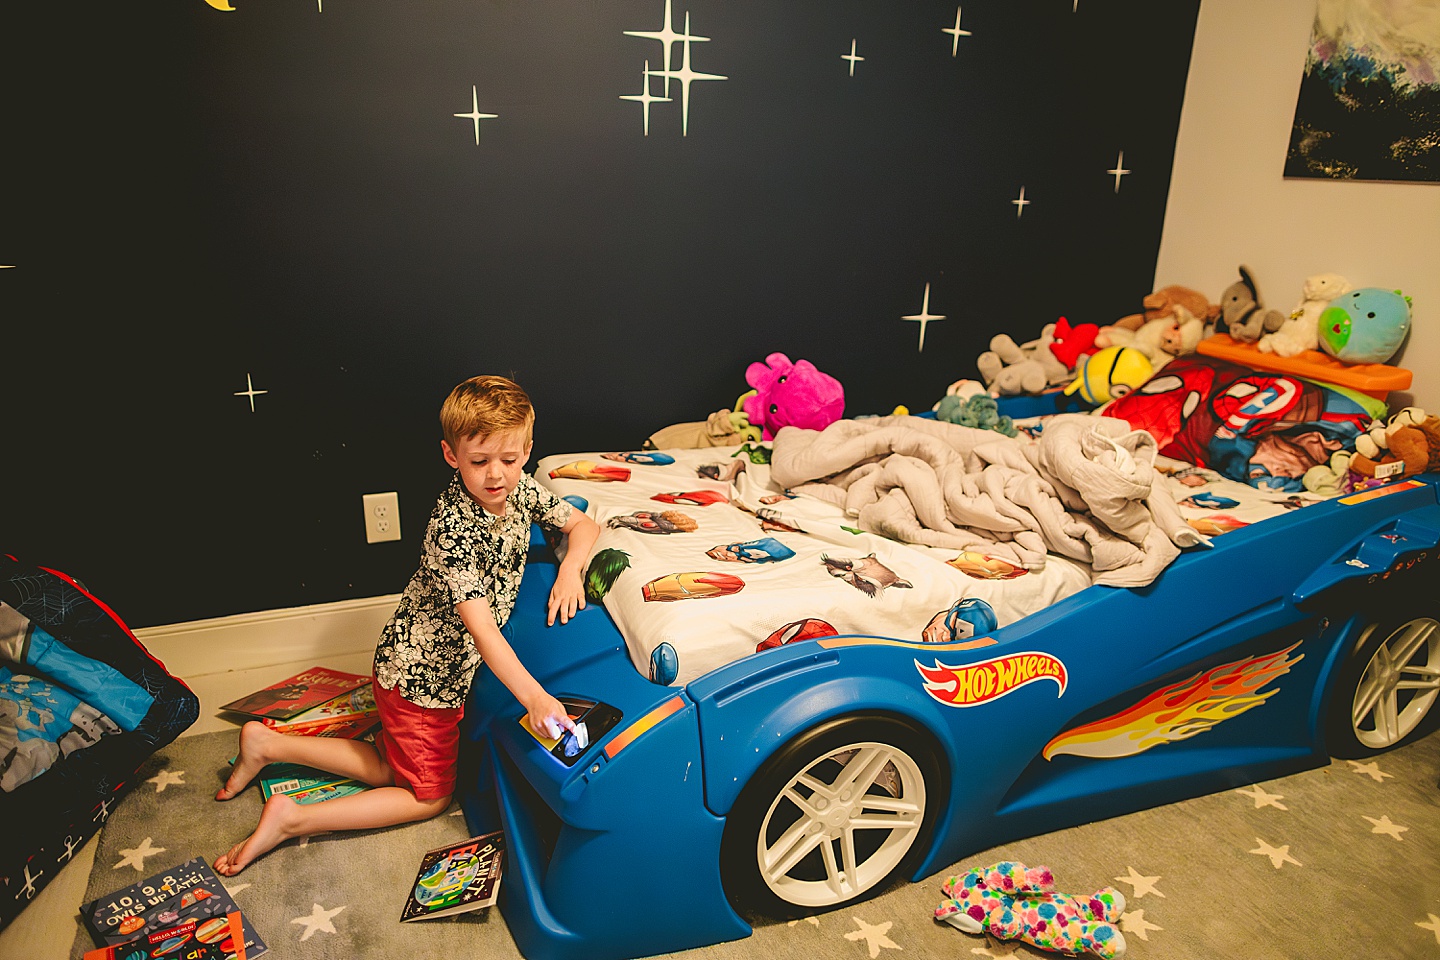 Kid hanging out in bedroom with race car bed